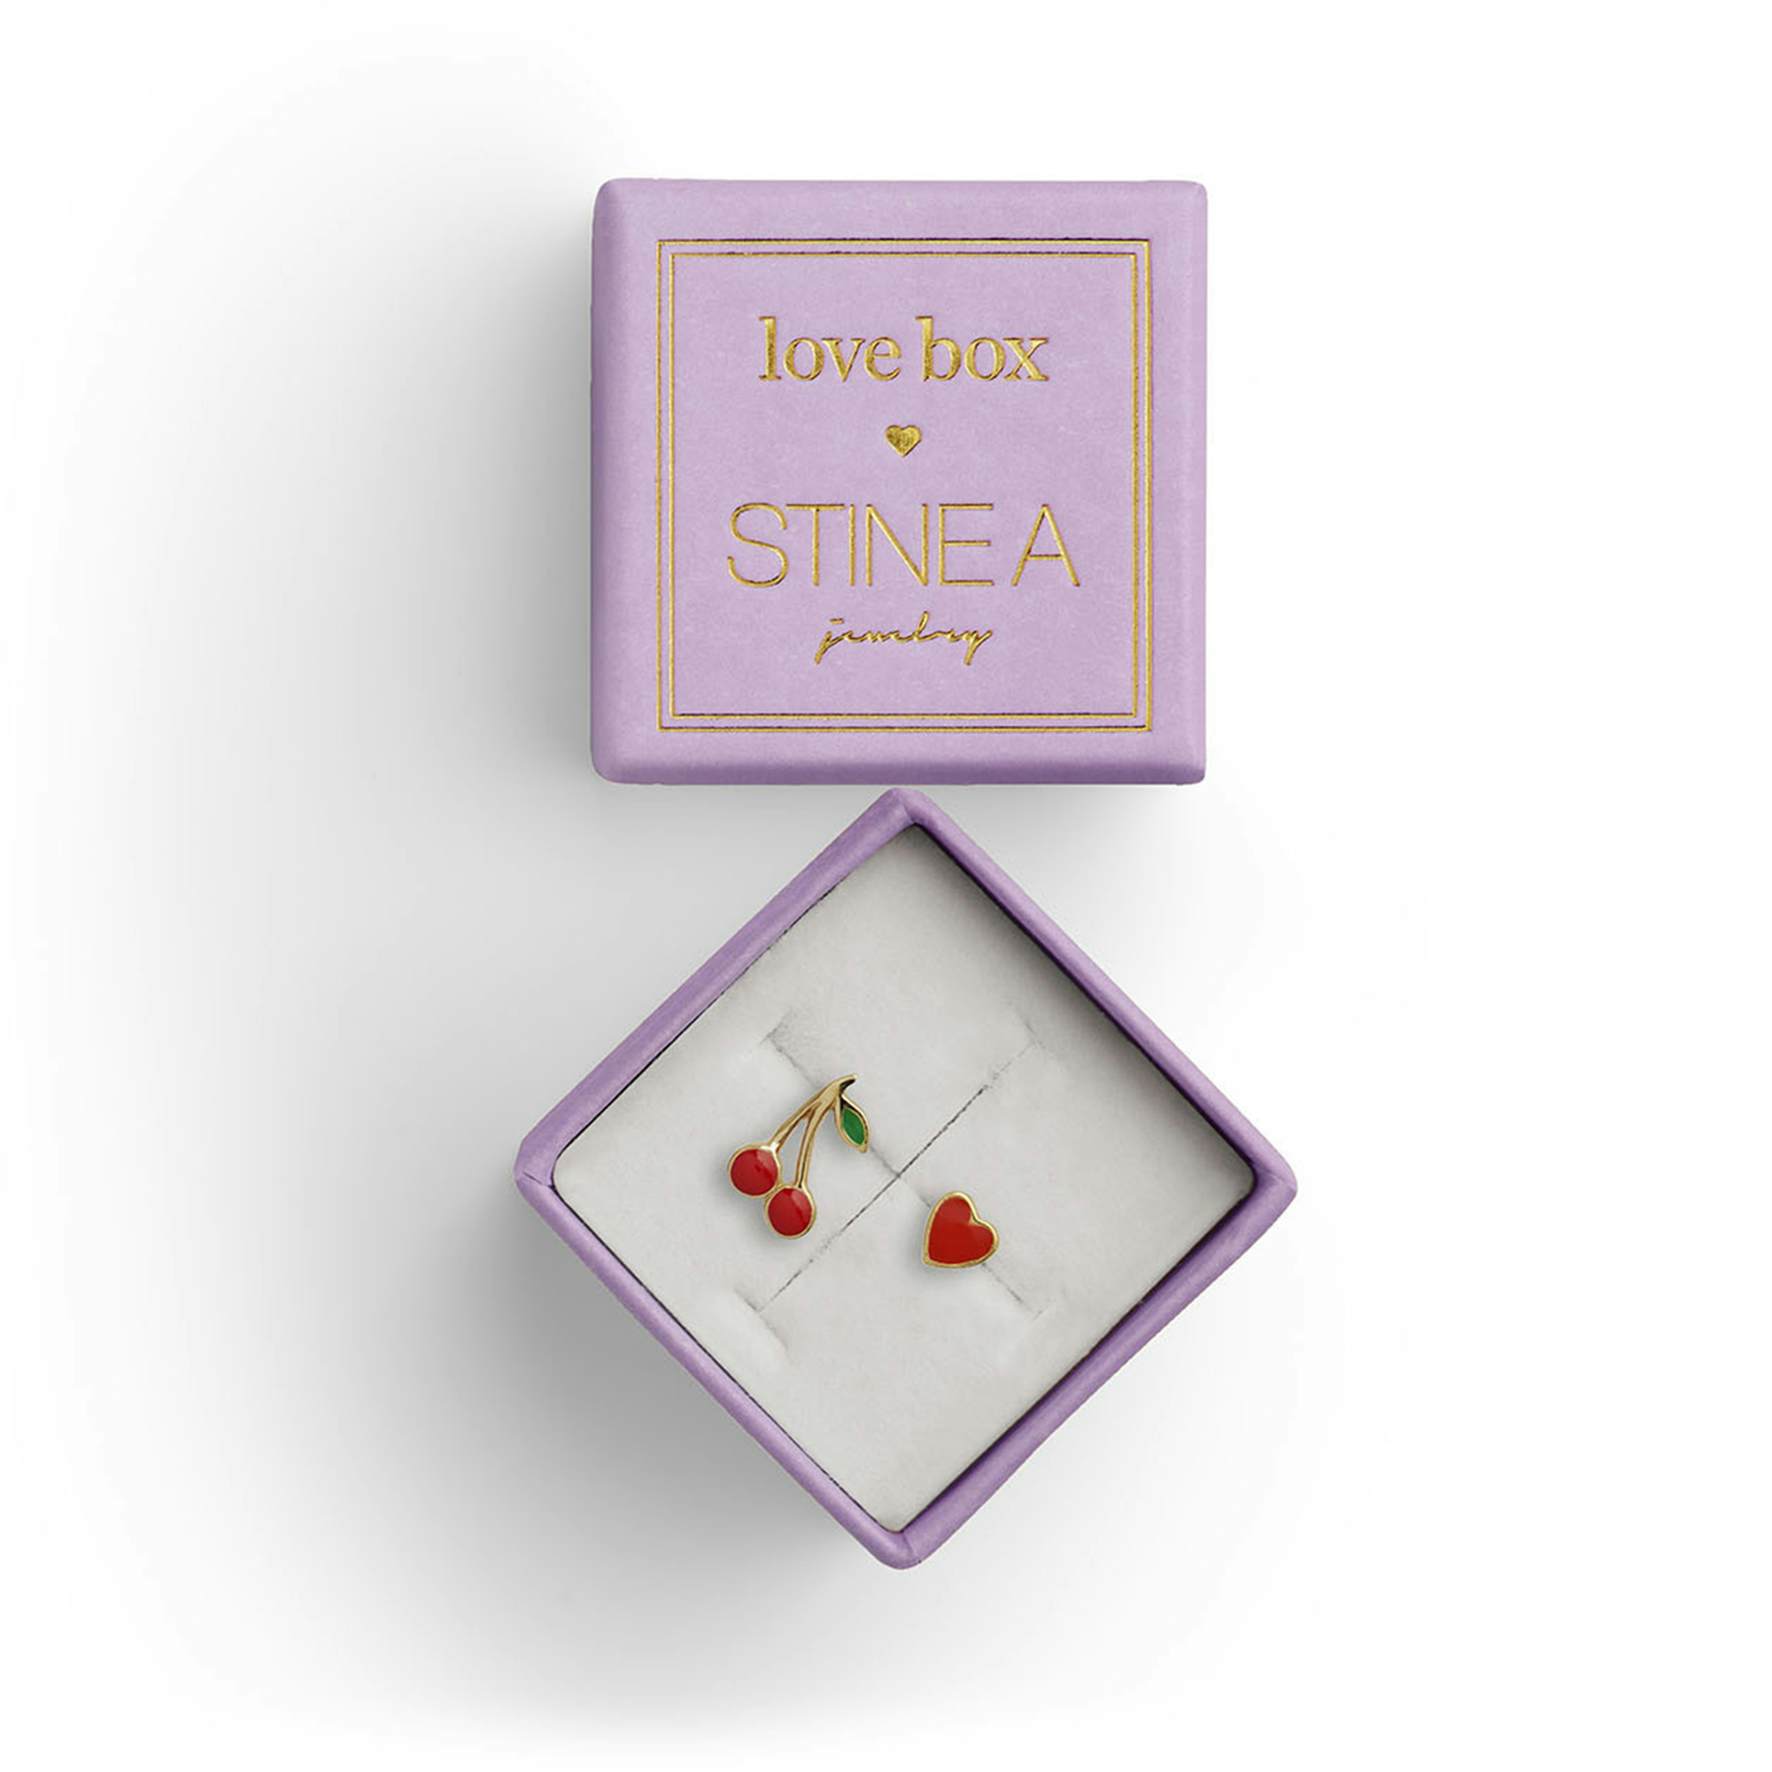 Love Box 70 from STINE A Jewelry in Goldplated-Silver Sterling 925